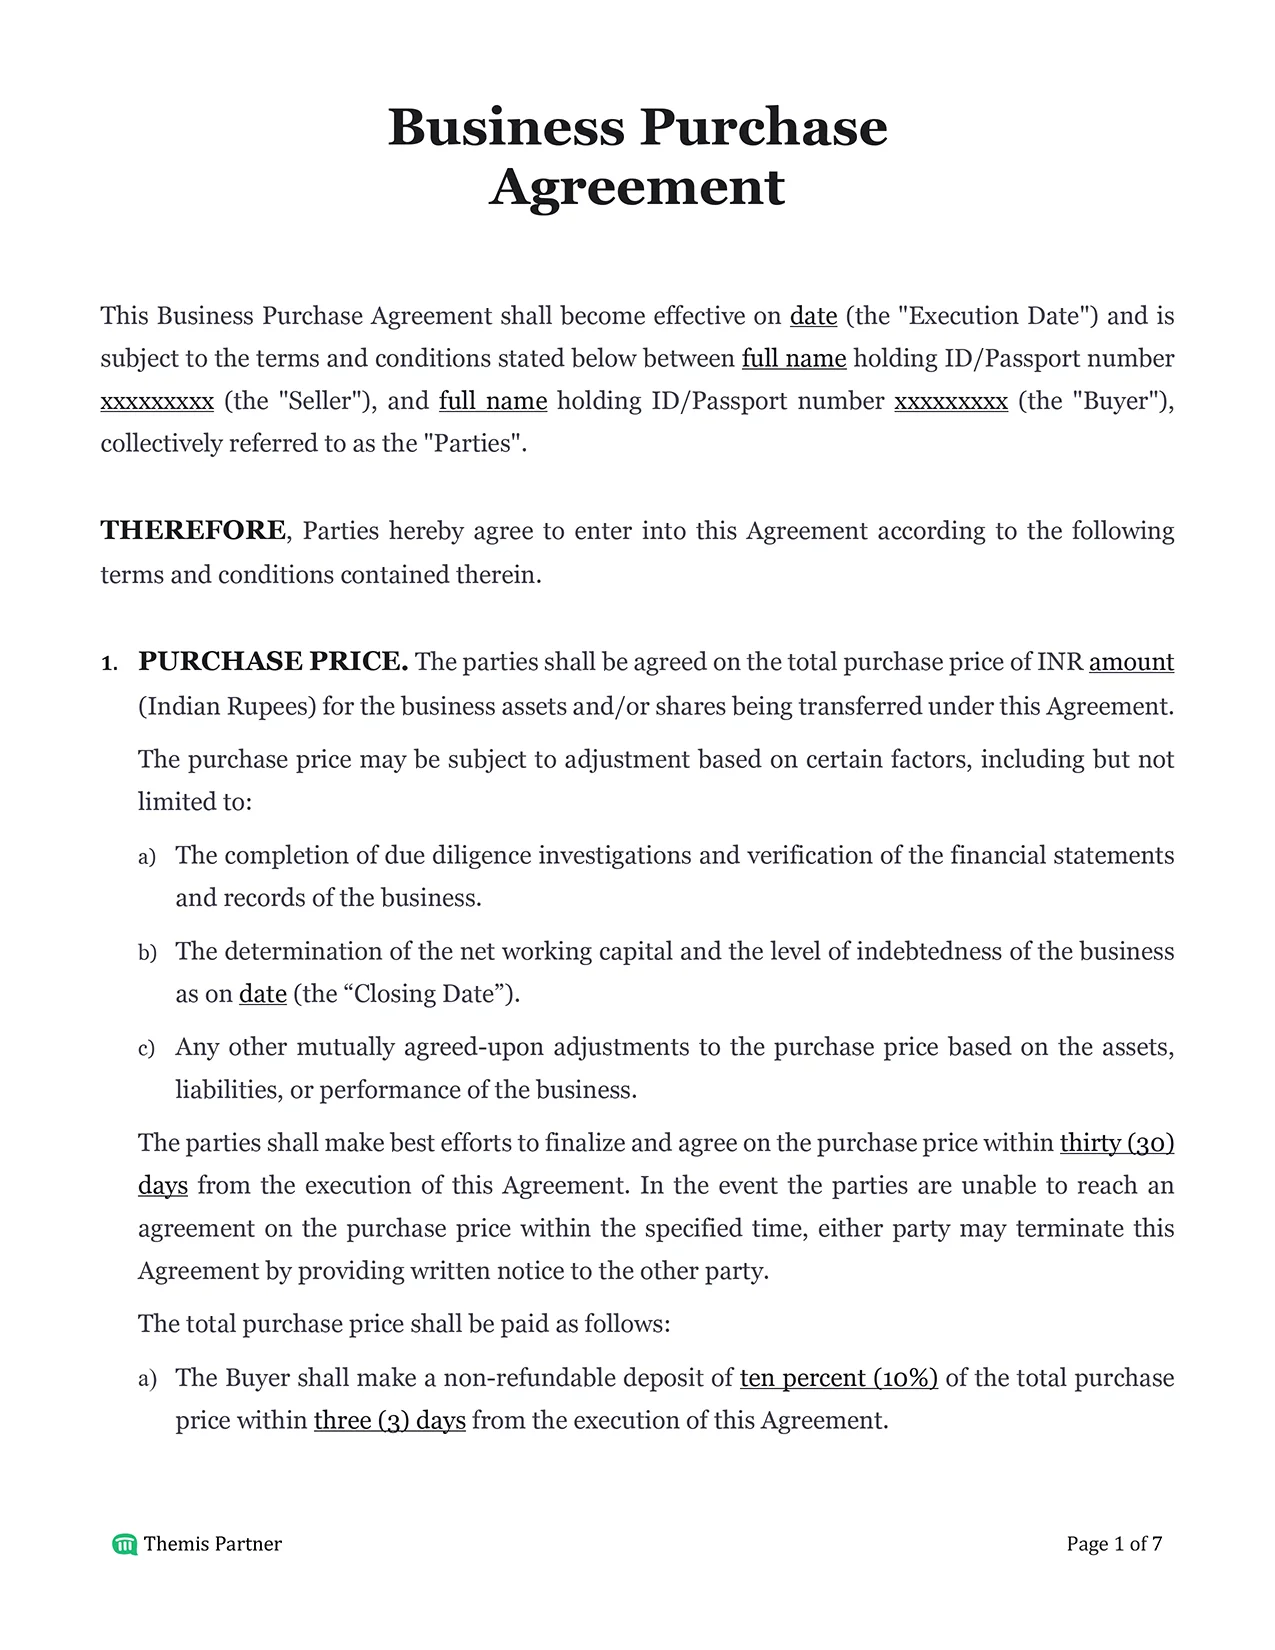 Business purchase agreement India 1